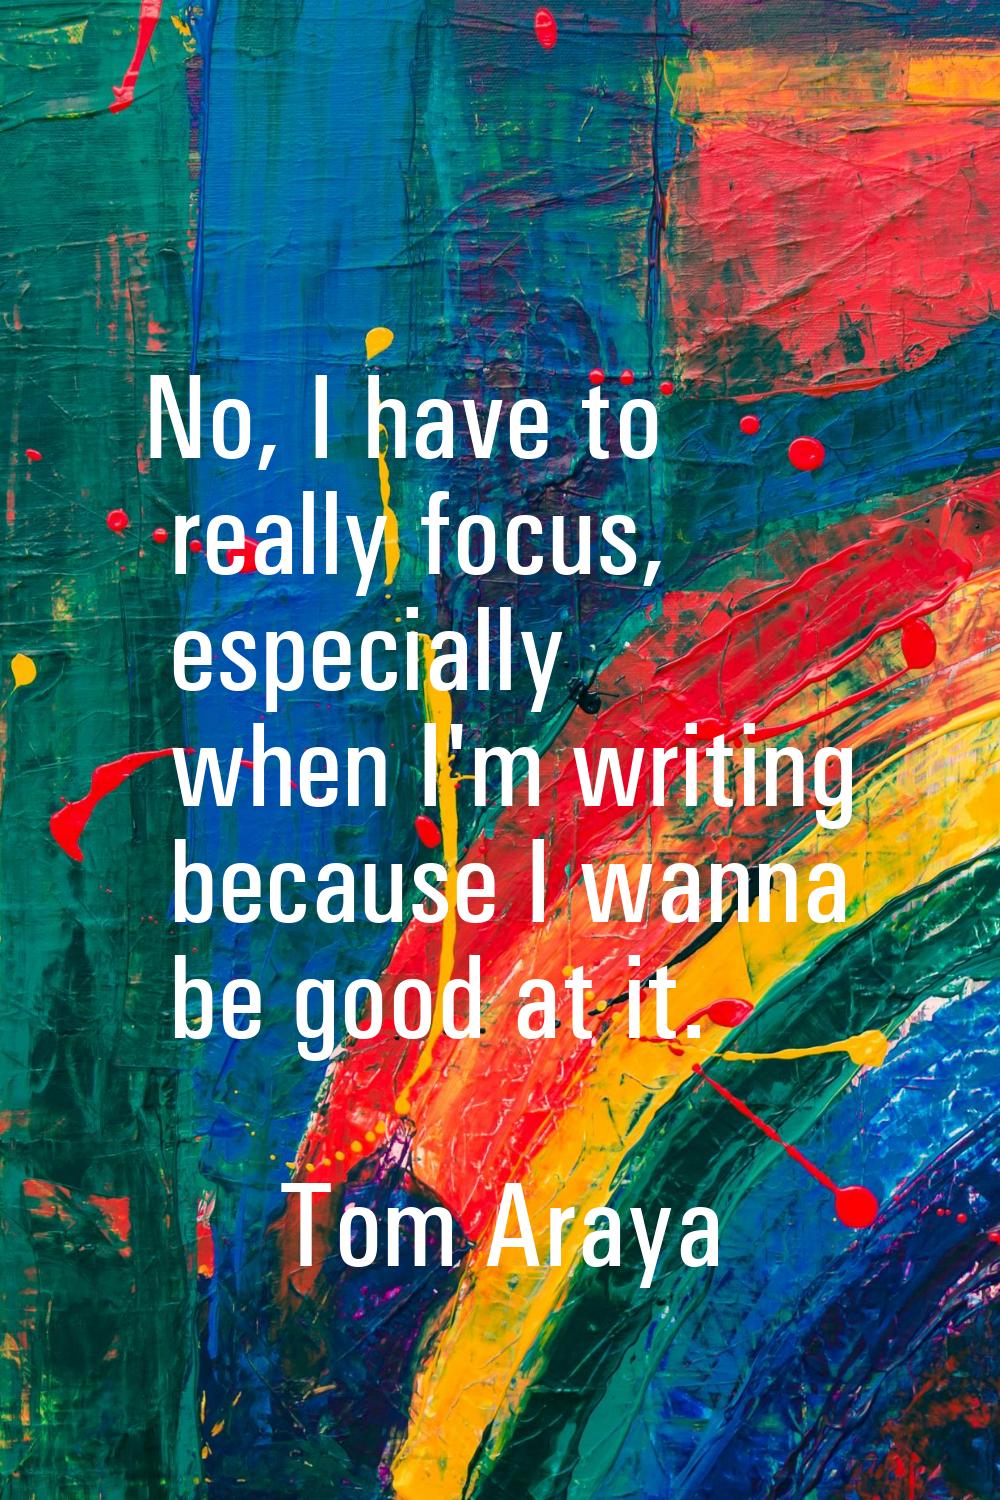 No, I have to really focus, especially when I'm writing because I wanna be good at it.